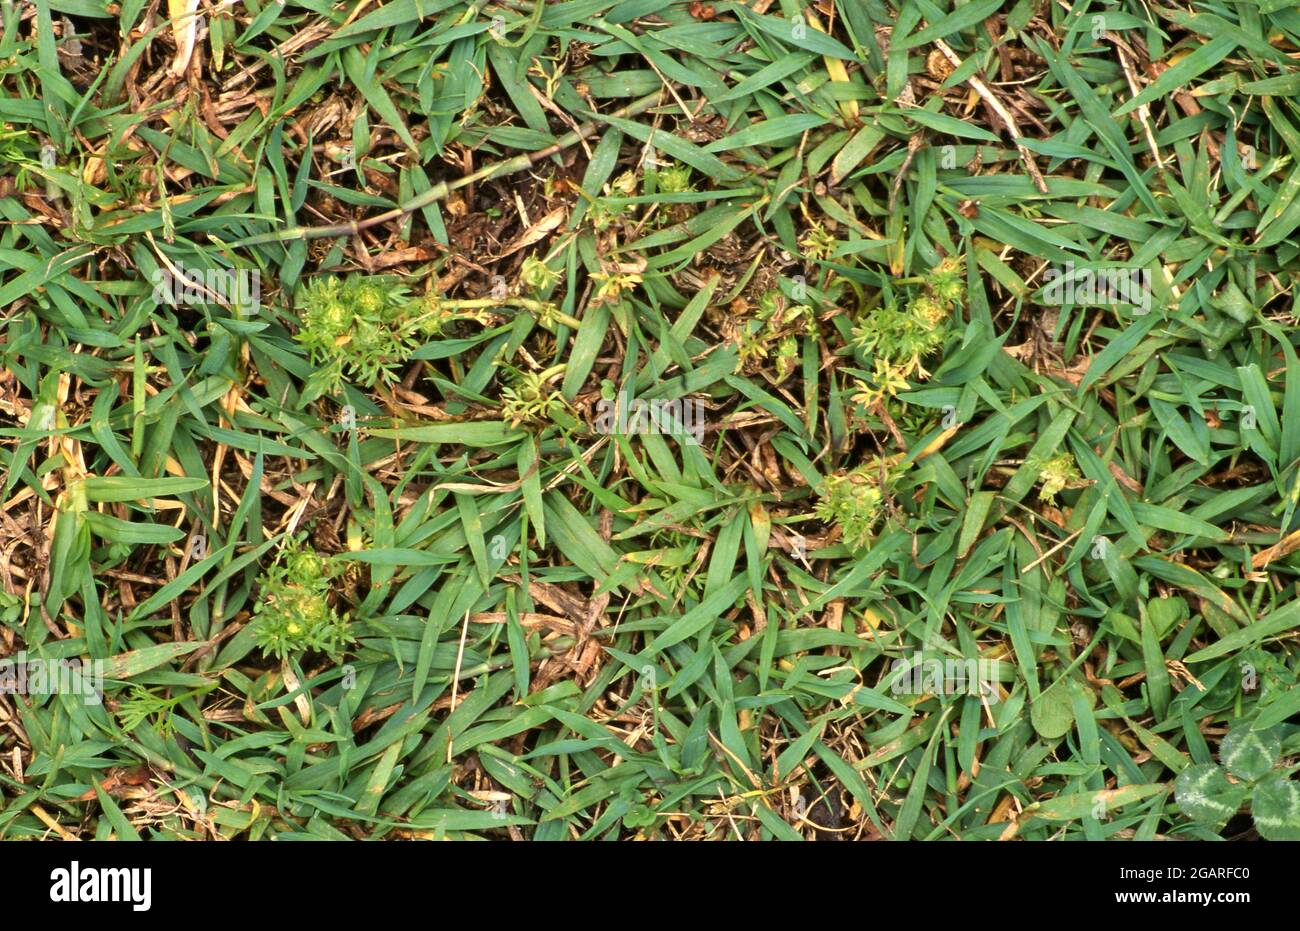 BINDII (SOLIVA SESSILIS) GROWING IN COUCH LAWN. ALSO KNOWN AS LAWN WEED, COMMON SOLIVA AND FIELD BURRWEED. Stock Photo